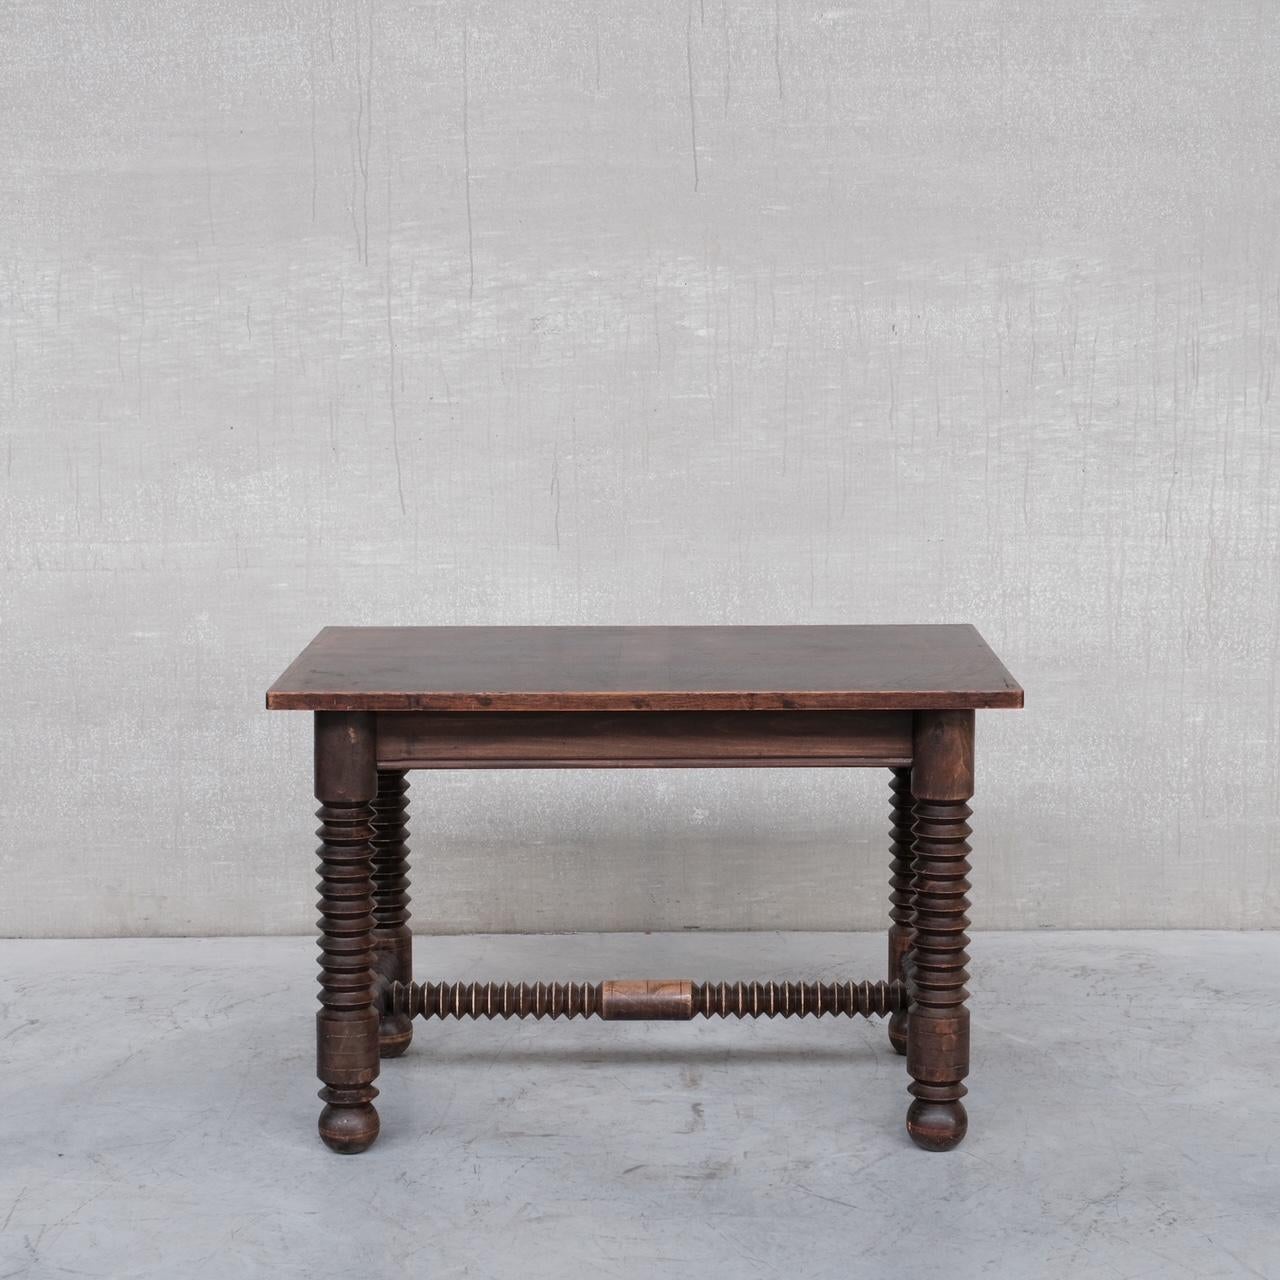 A good quality oak turned desk or petite table attributed to Charles Dudouyt. 

France, c1940-50s. 

A useful functional table that is enhanced by the decorative turned legs typical of Dudouyt's style. 

Remains in good vintage condition, some